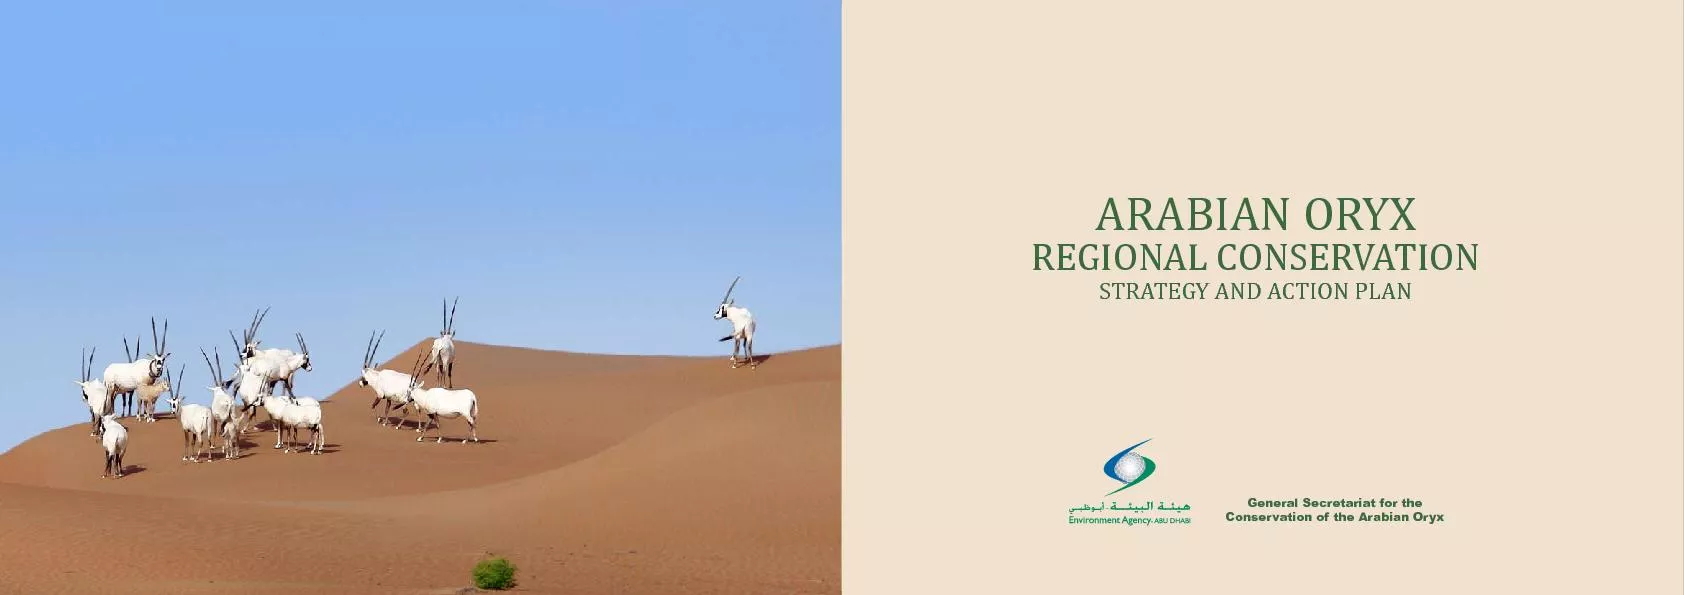 ARABIAN ORYX REGIONAL CONSERVATION STRATEGY AND ACTION PLAN